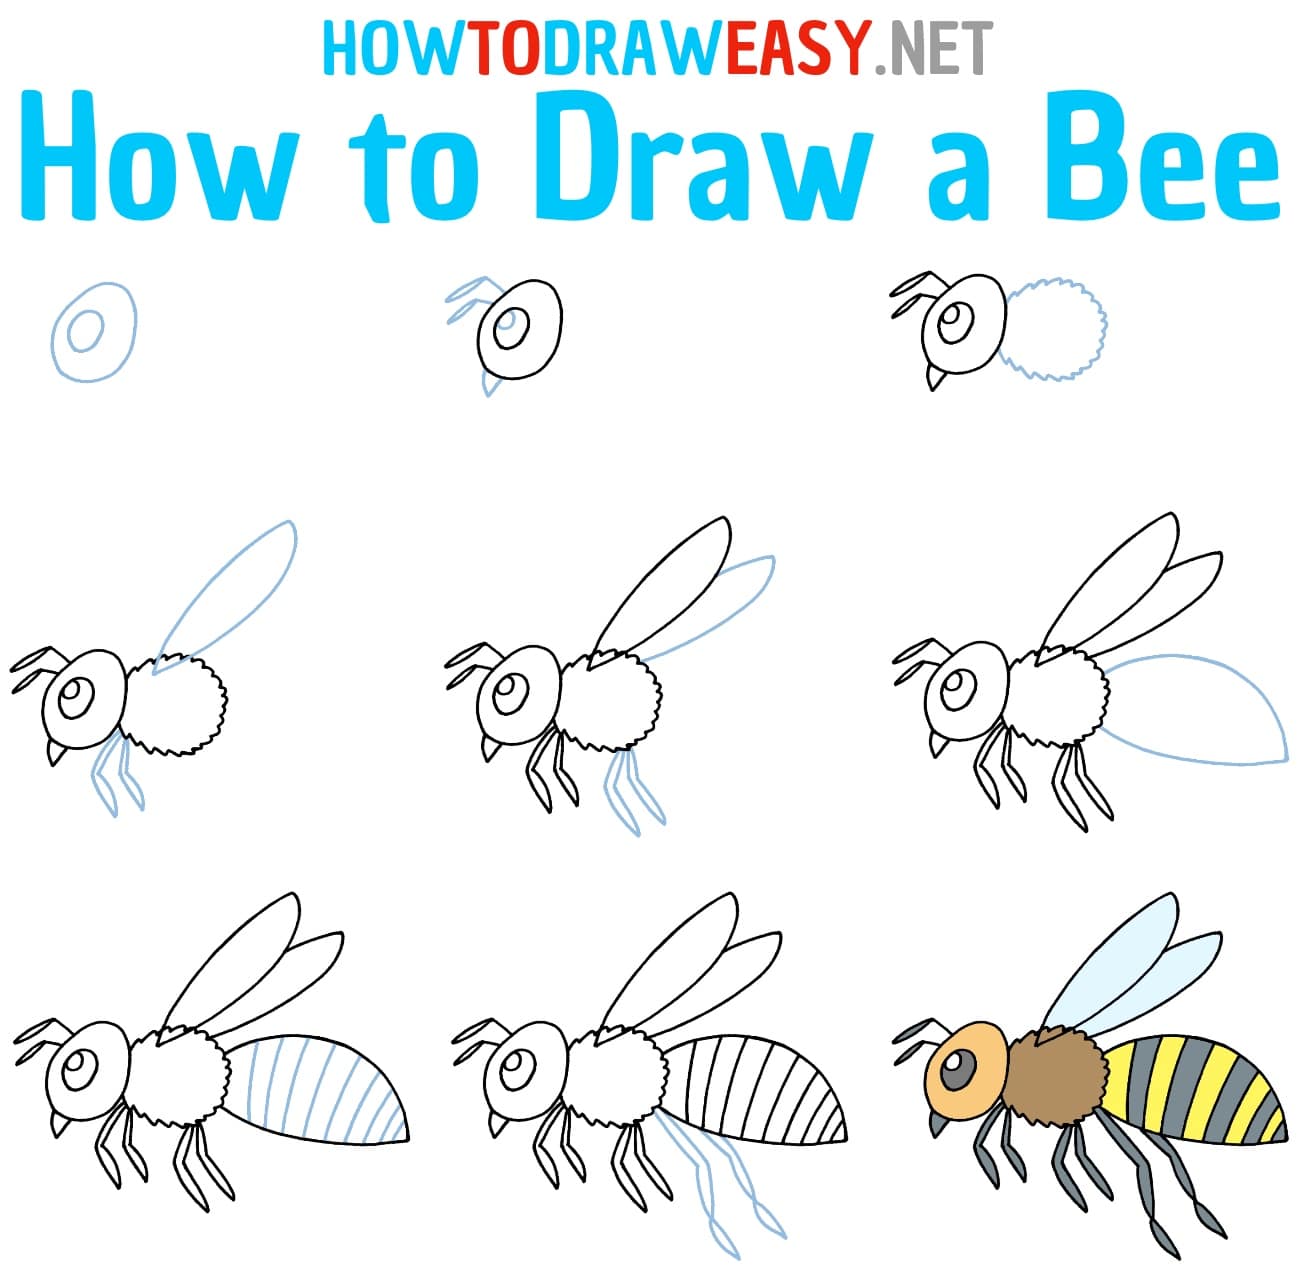 How to Draw a Bee Step by Step